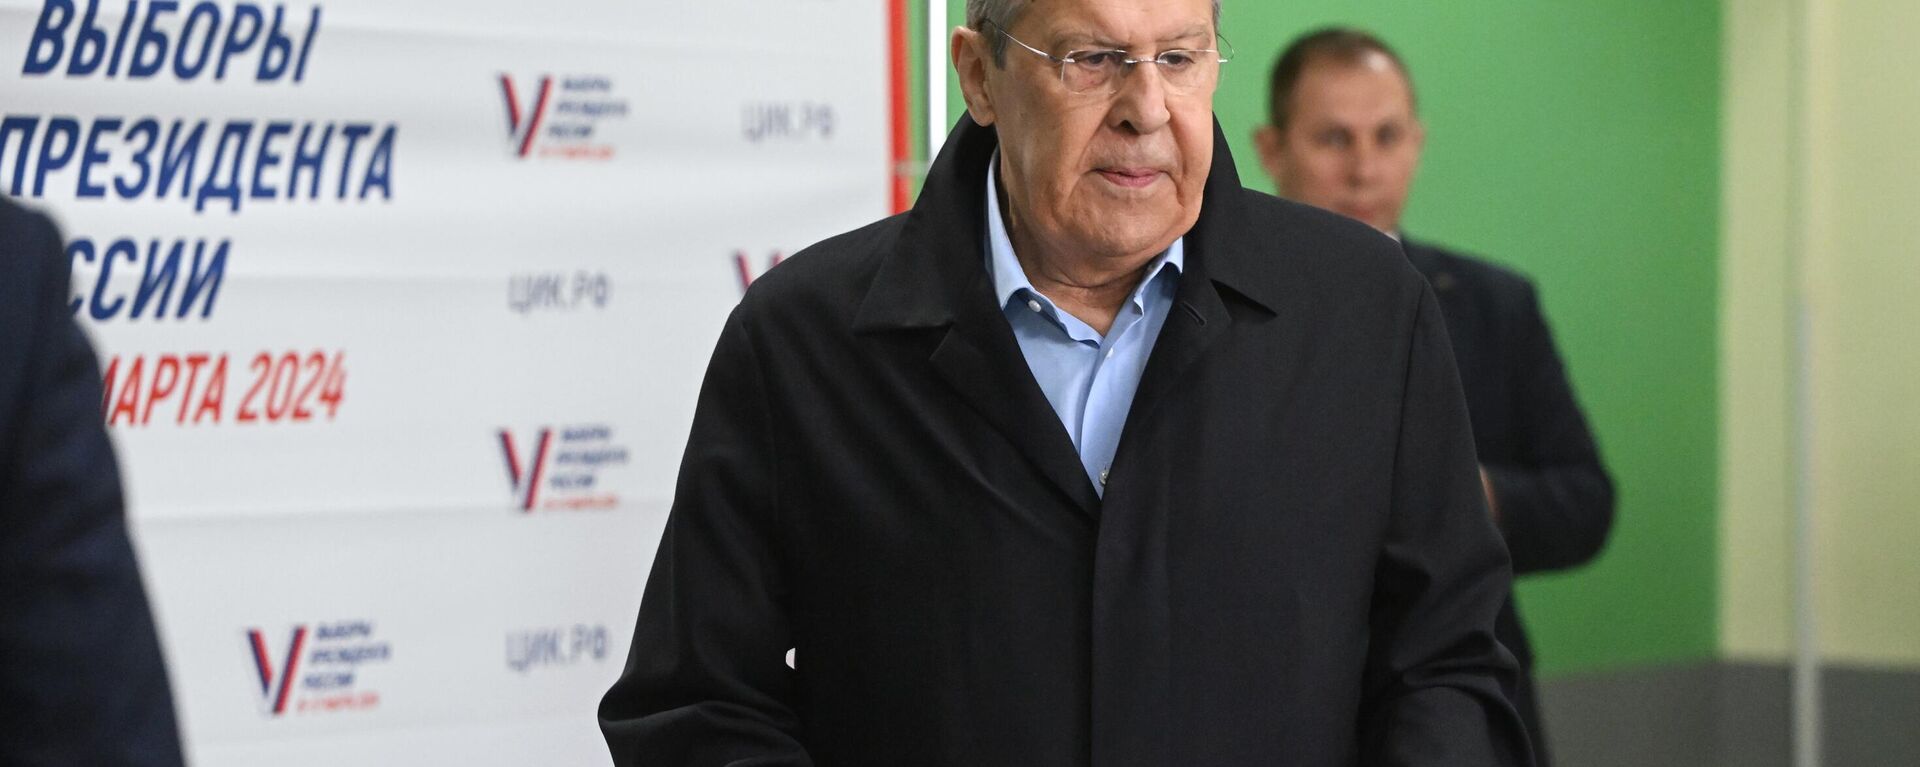 Russian Foreign Minister Sergey Lavrov votes at the country's presidential elections. March 15, 2024. - Sputnik International, 1920, 15.03.2024